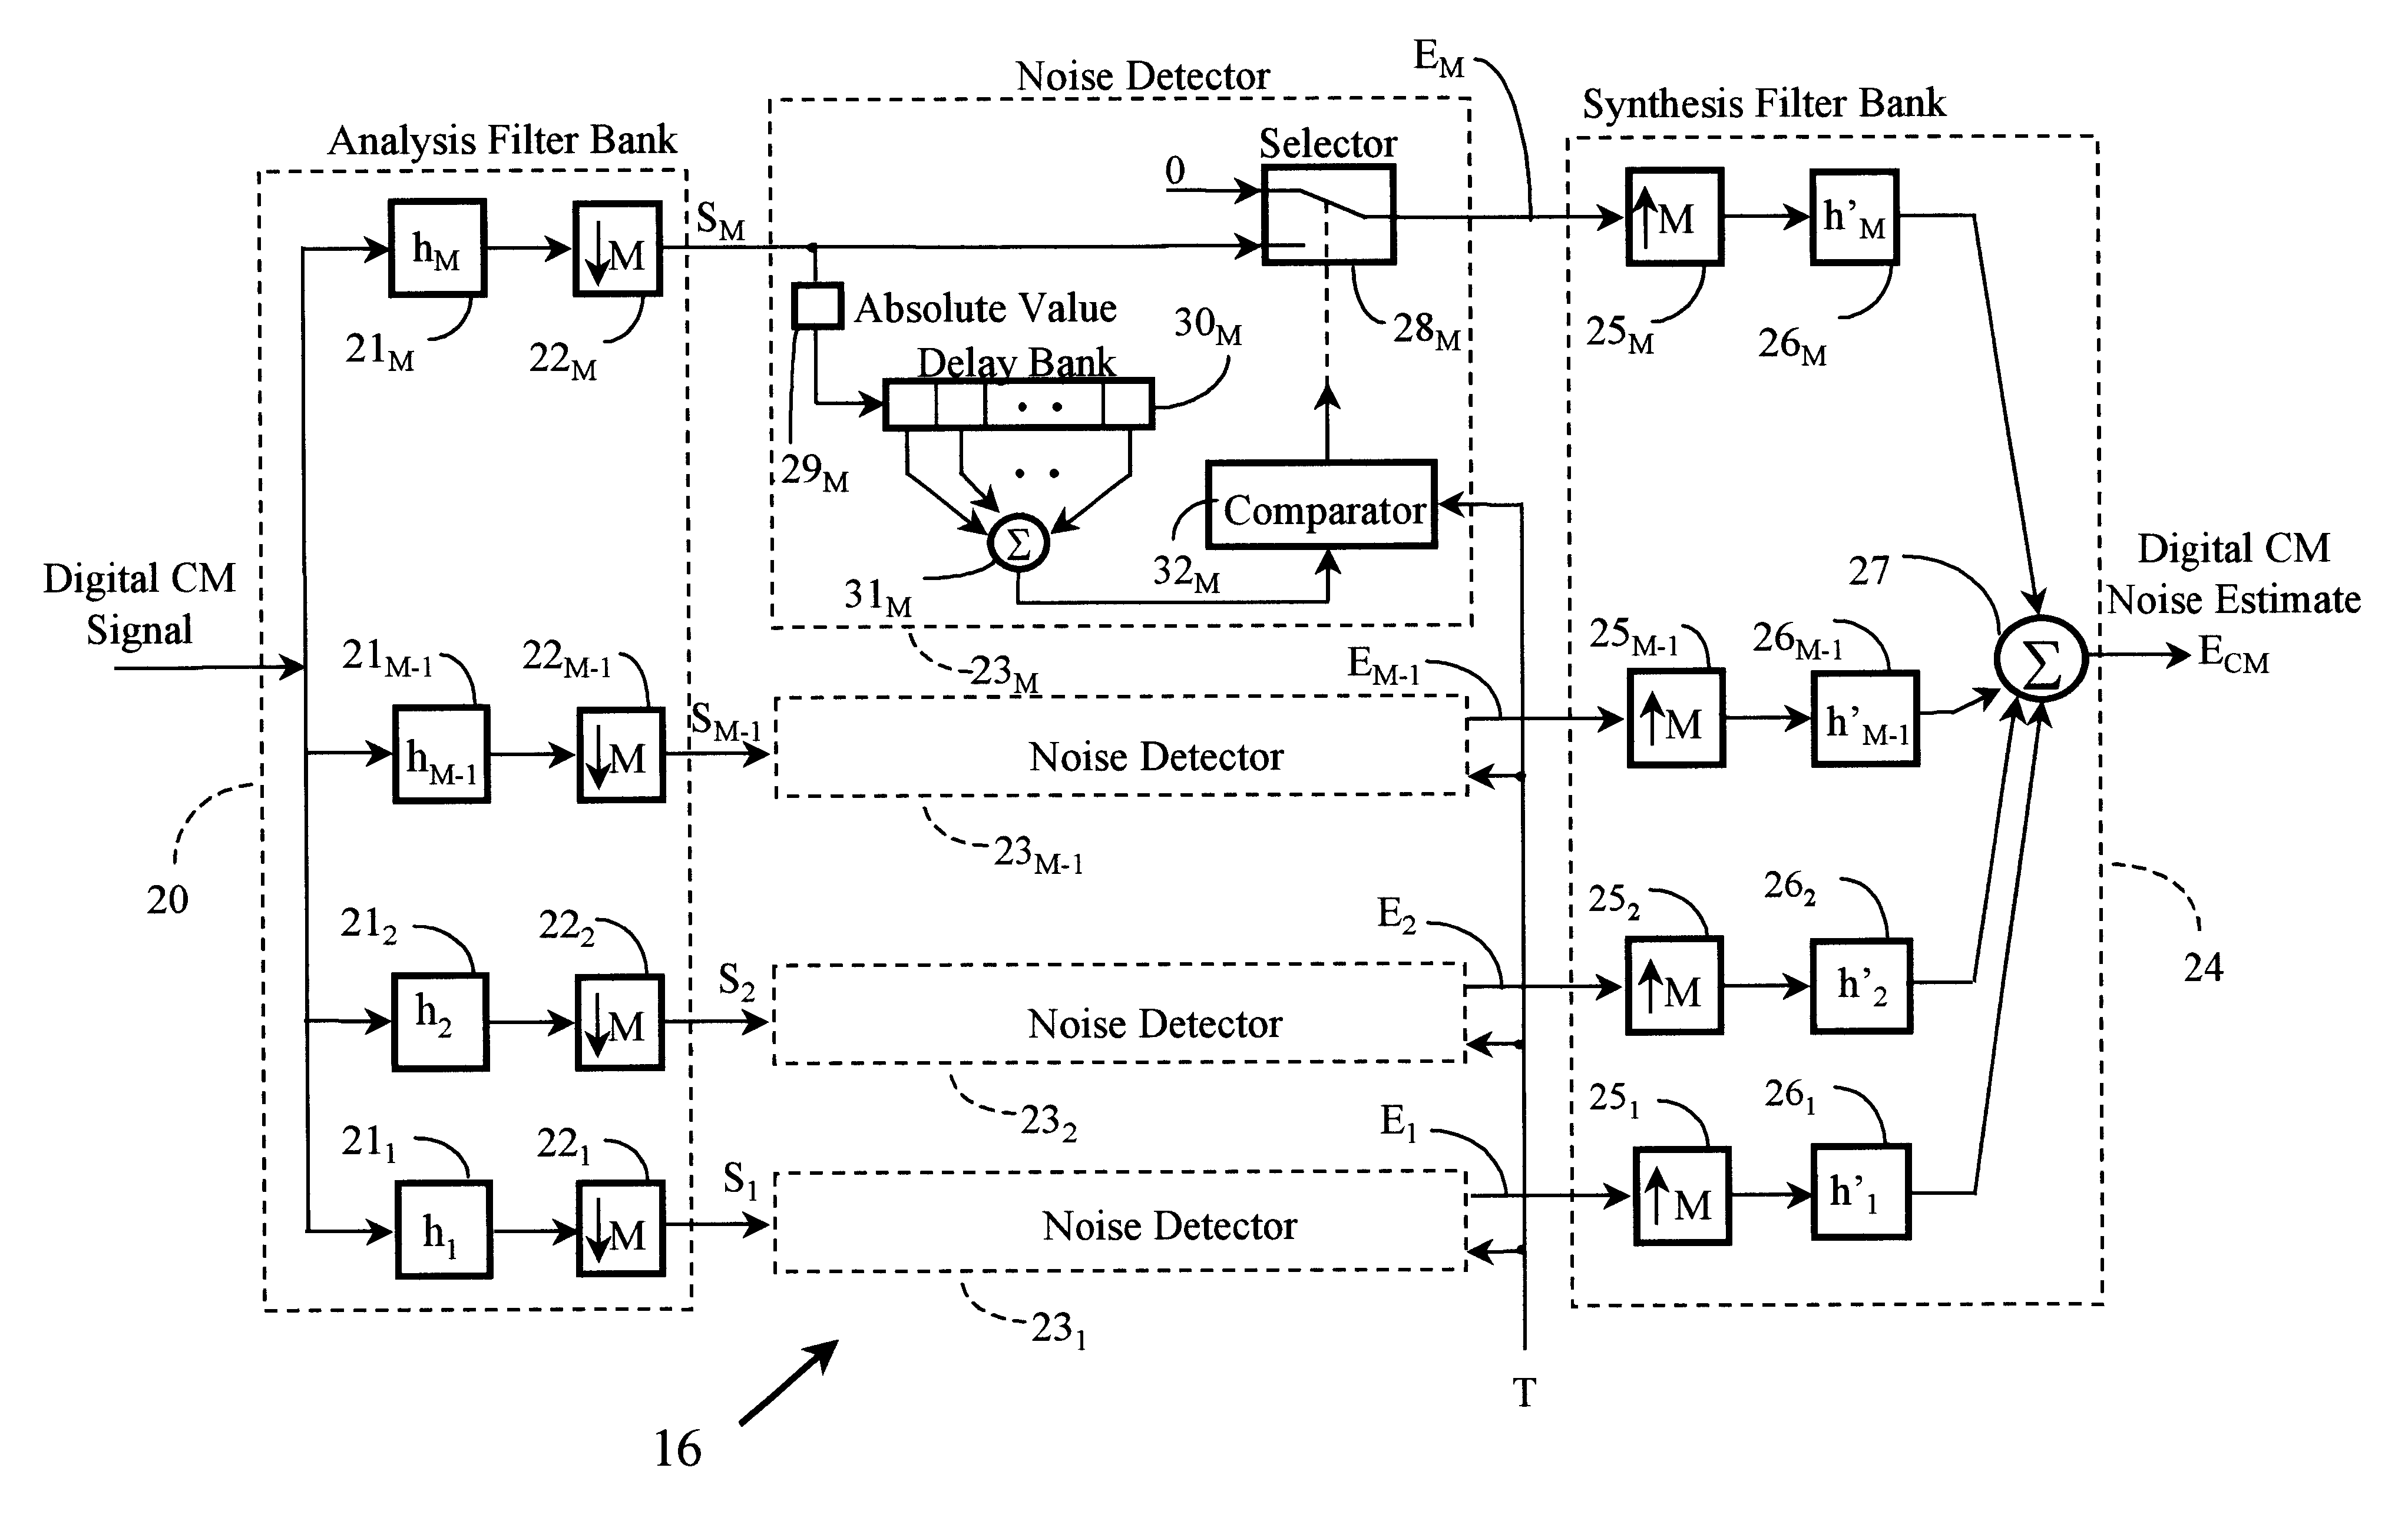 Suppression of radio frequency interference and impulse noise in communications channels